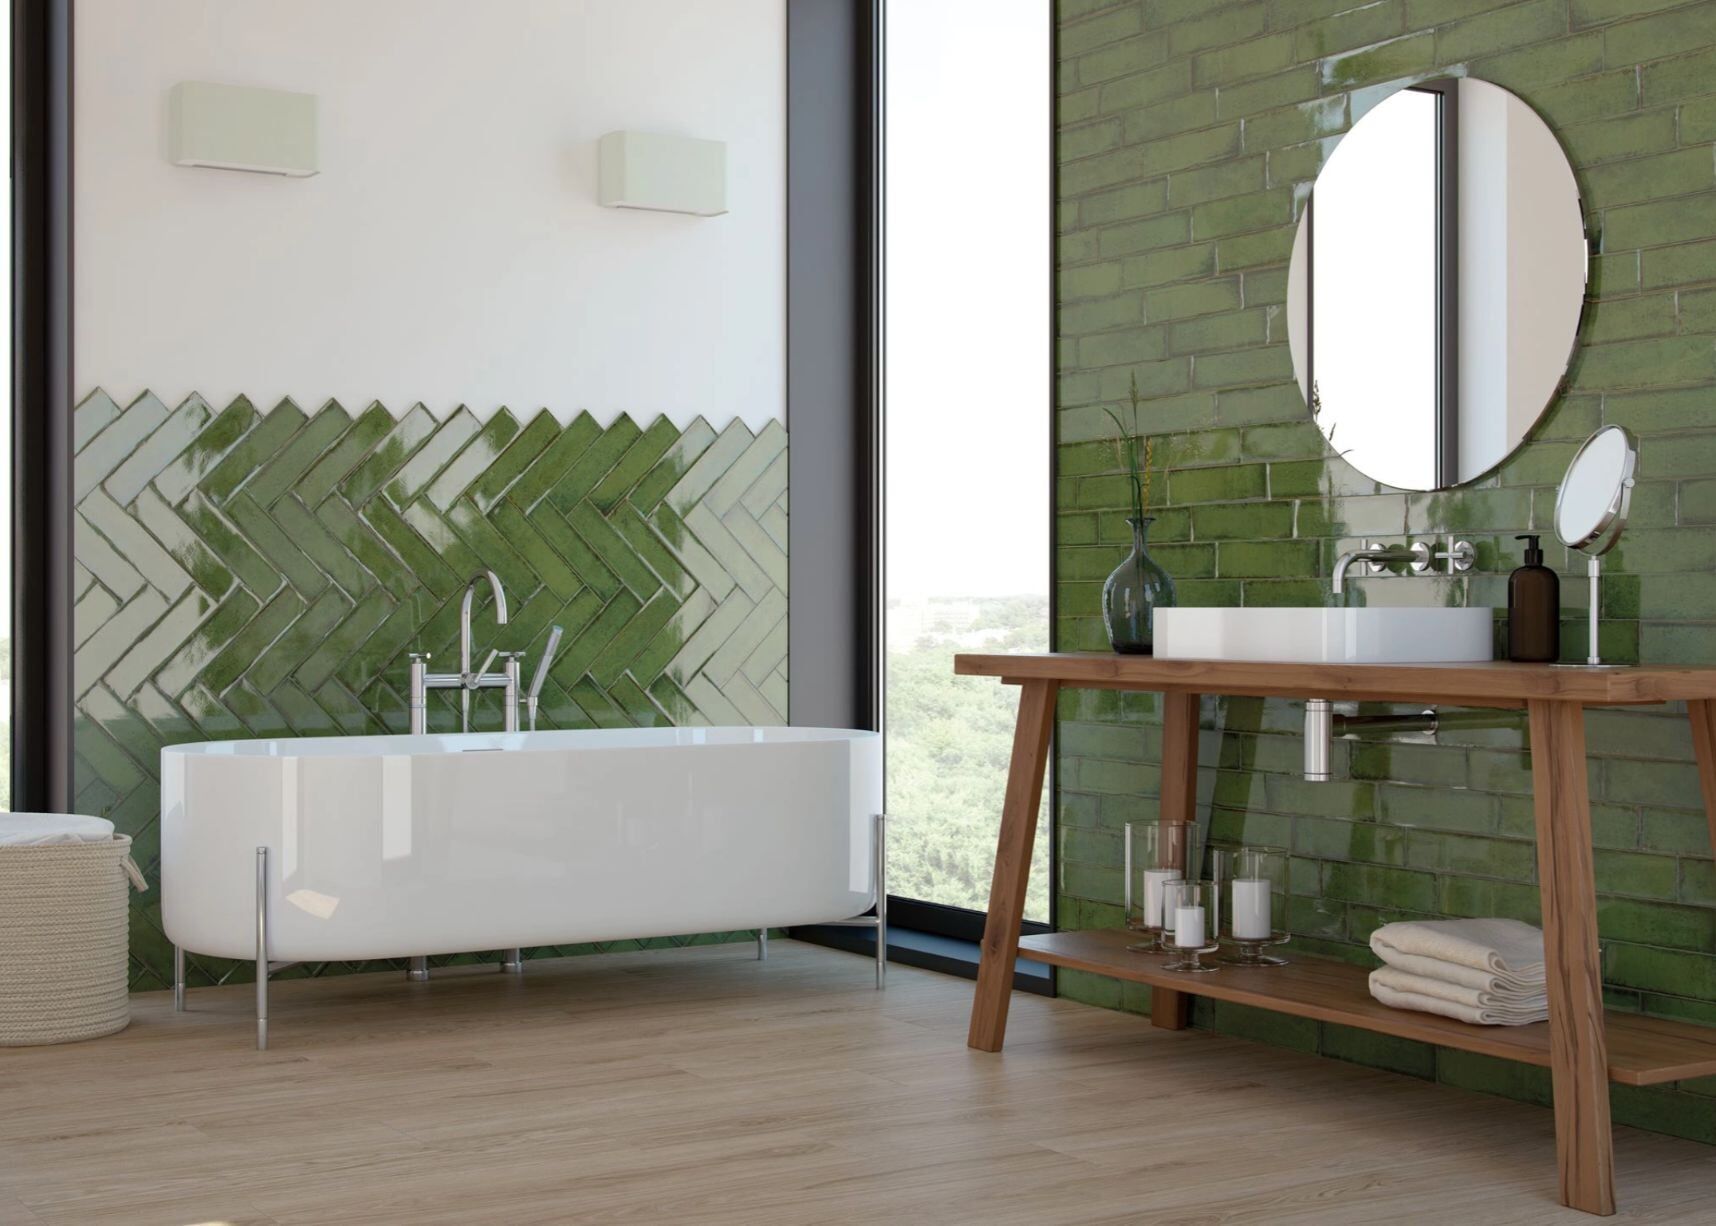 Bathroom with Green Feature Wall Tiles — Tile Supplies in Alstonville in Alstonville, NSW